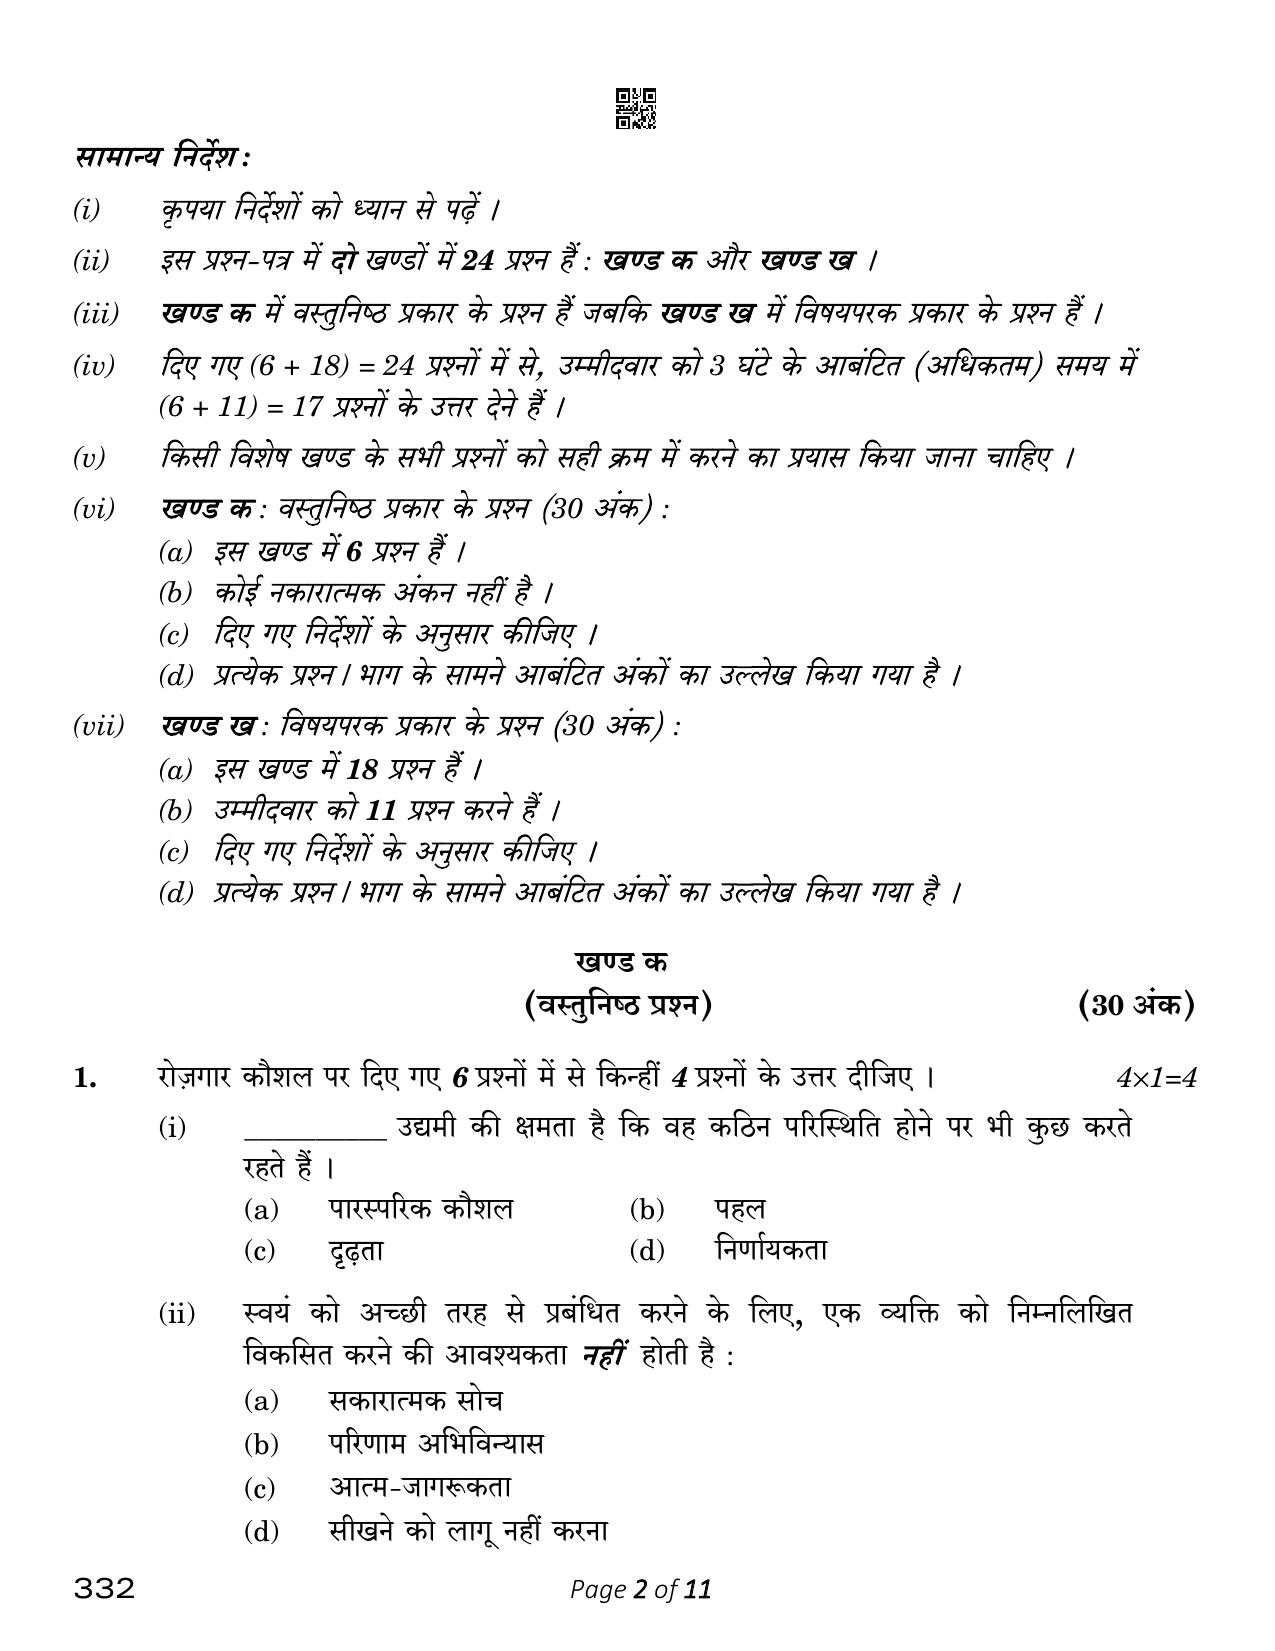 CBSE Class 12 Agriculture (Compartment) 2023 Question Paper - Page 2